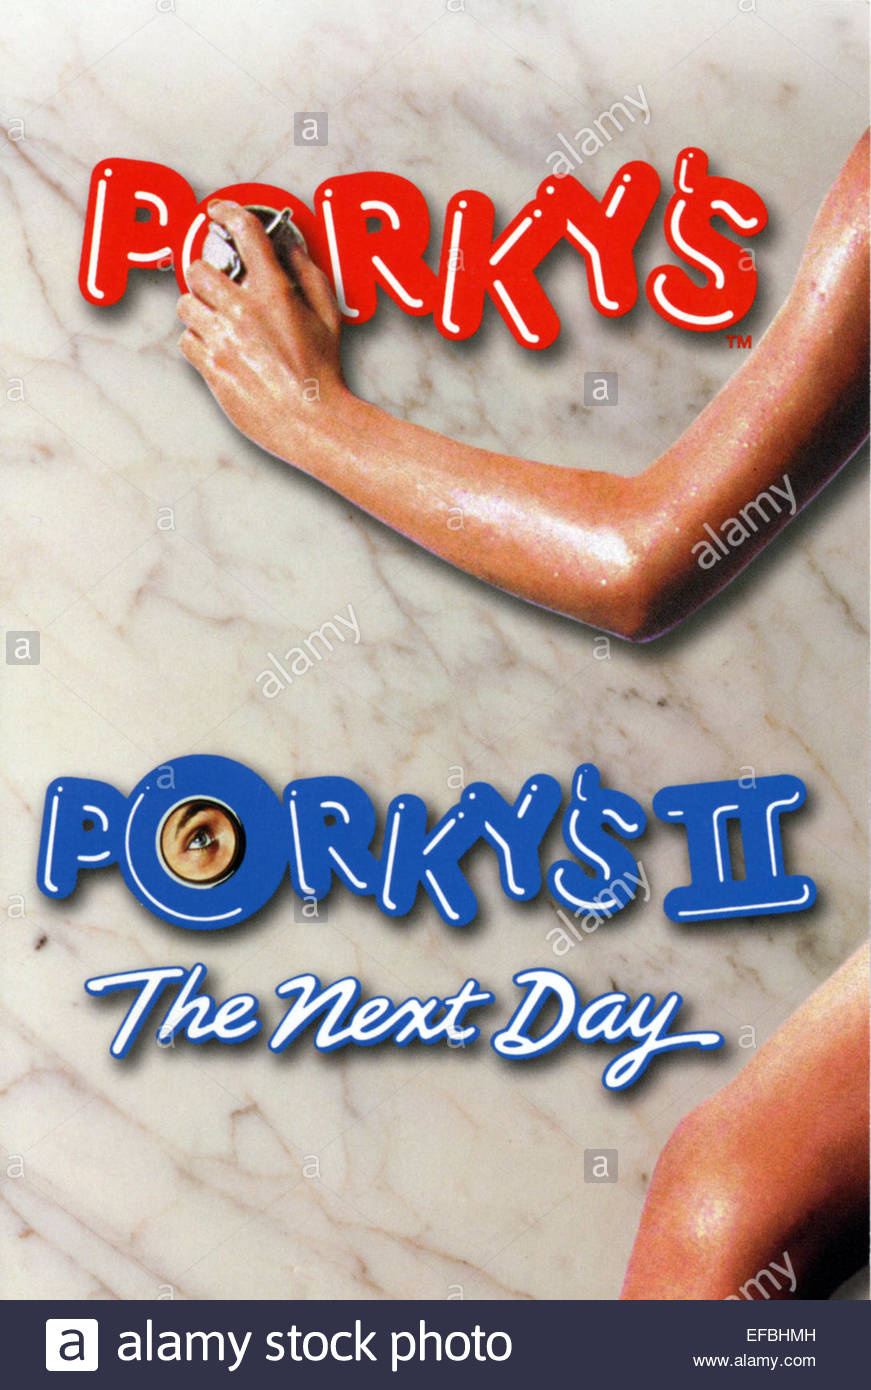 Porky's II: The Next Day Main Poster